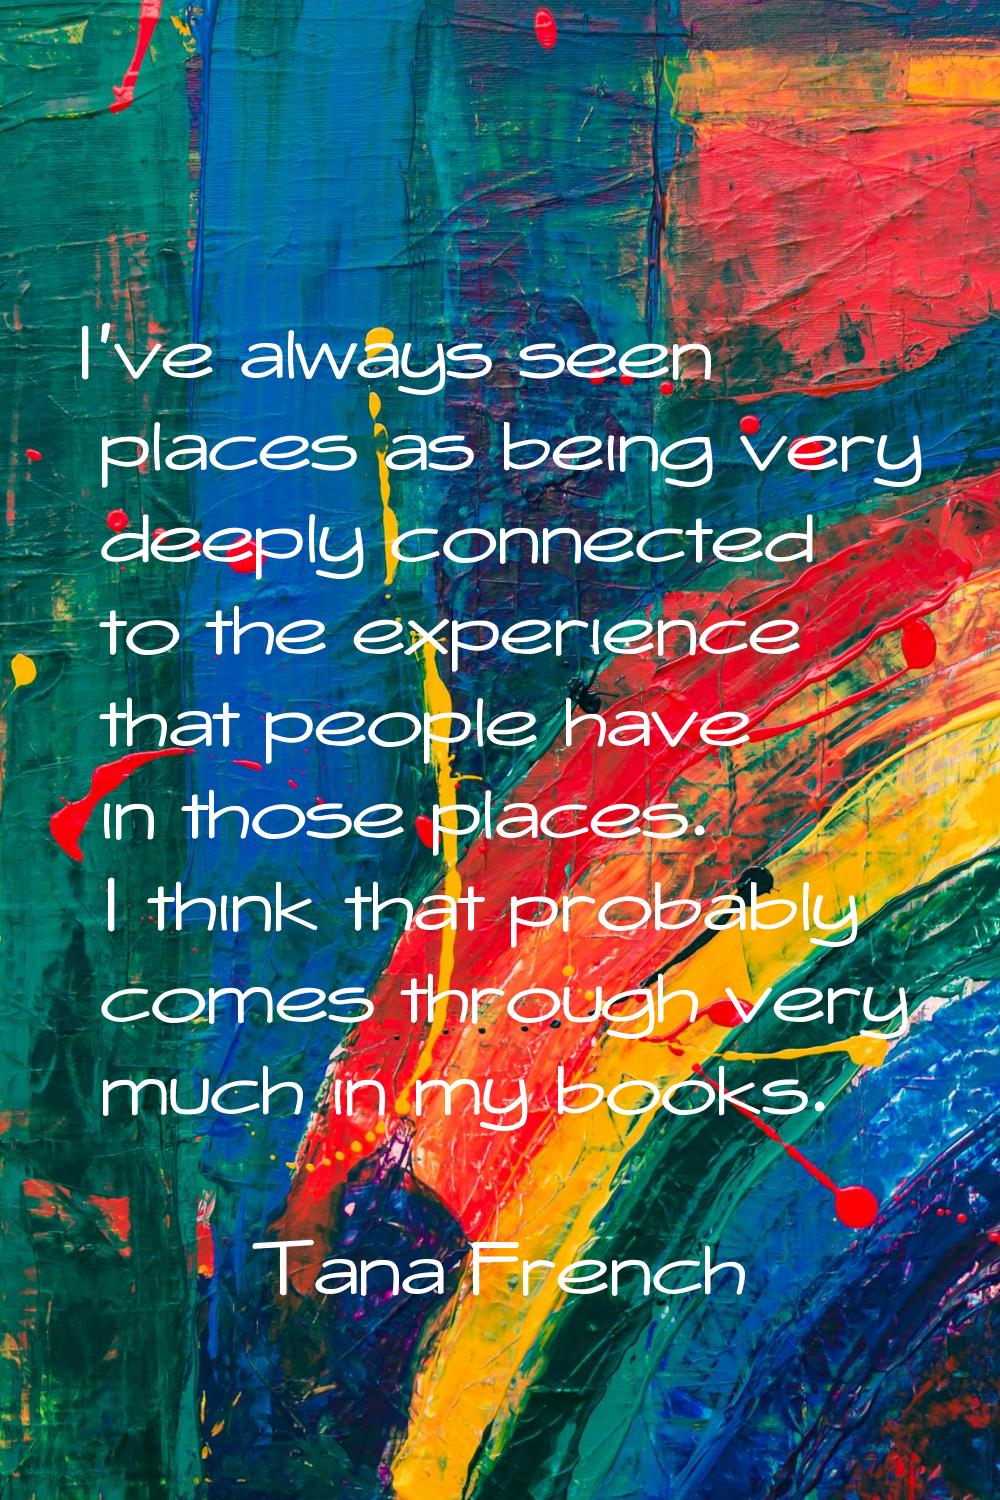 I've always seen places as being very deeply connected to the experience that people have in those 